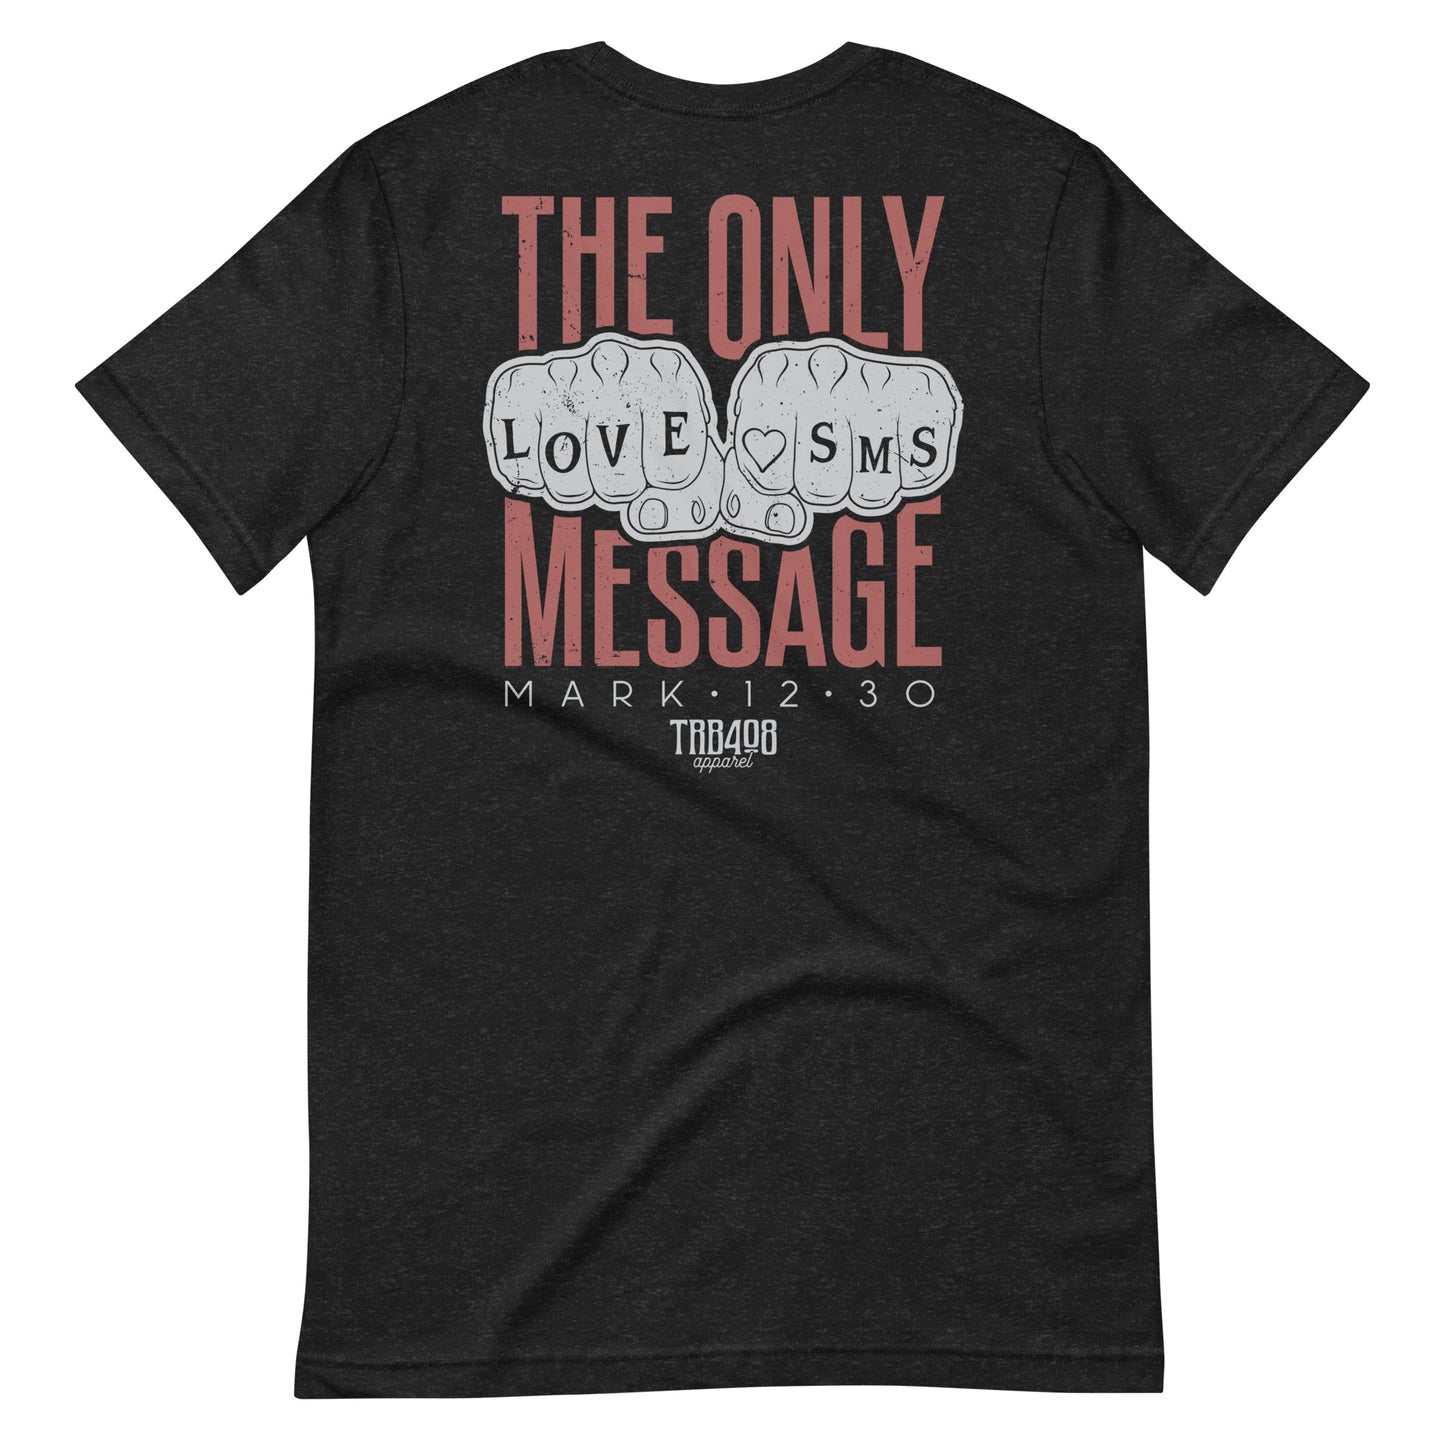 The LOVE MESSAGE Tee